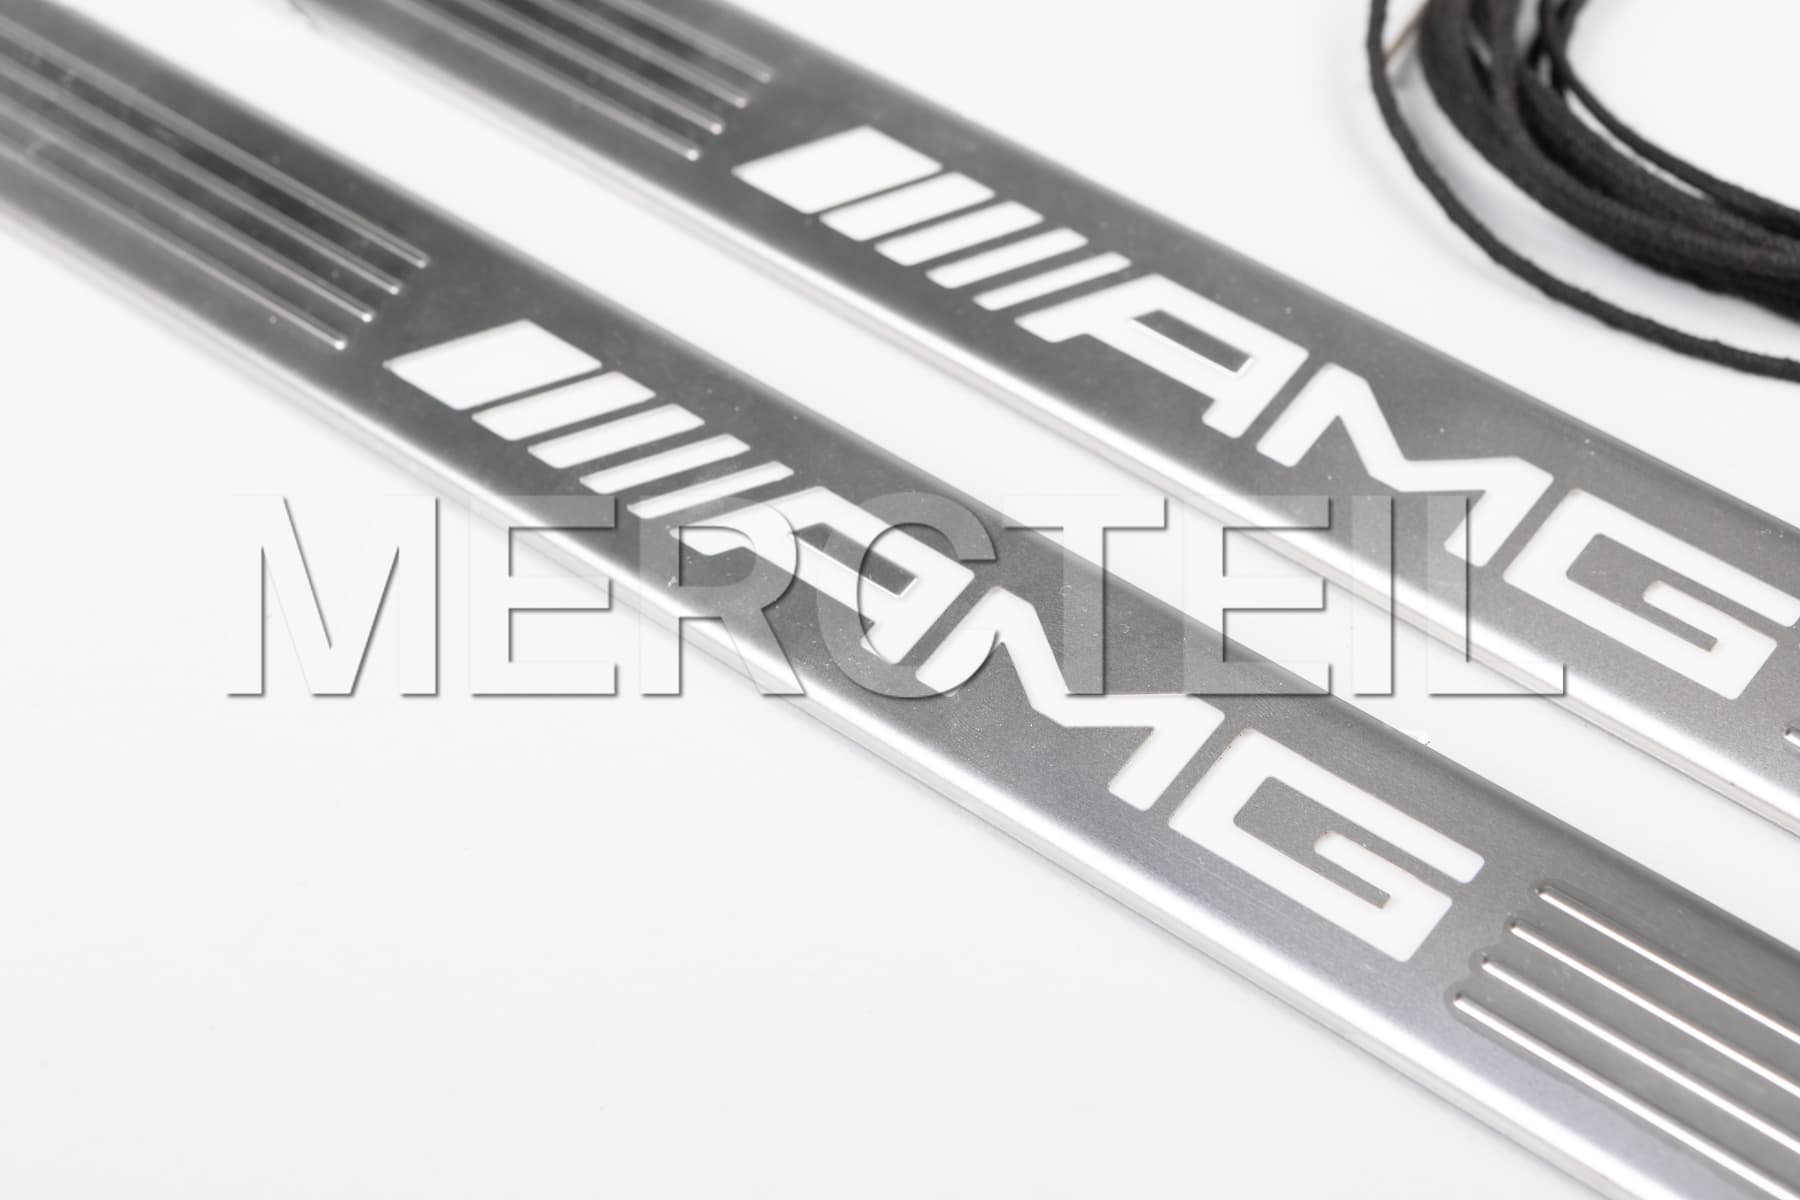 AMG Front Door Illuminated Door Sill Covers Conversion Kit Genuine Mercedes-AMG (Part number: A1666809101)